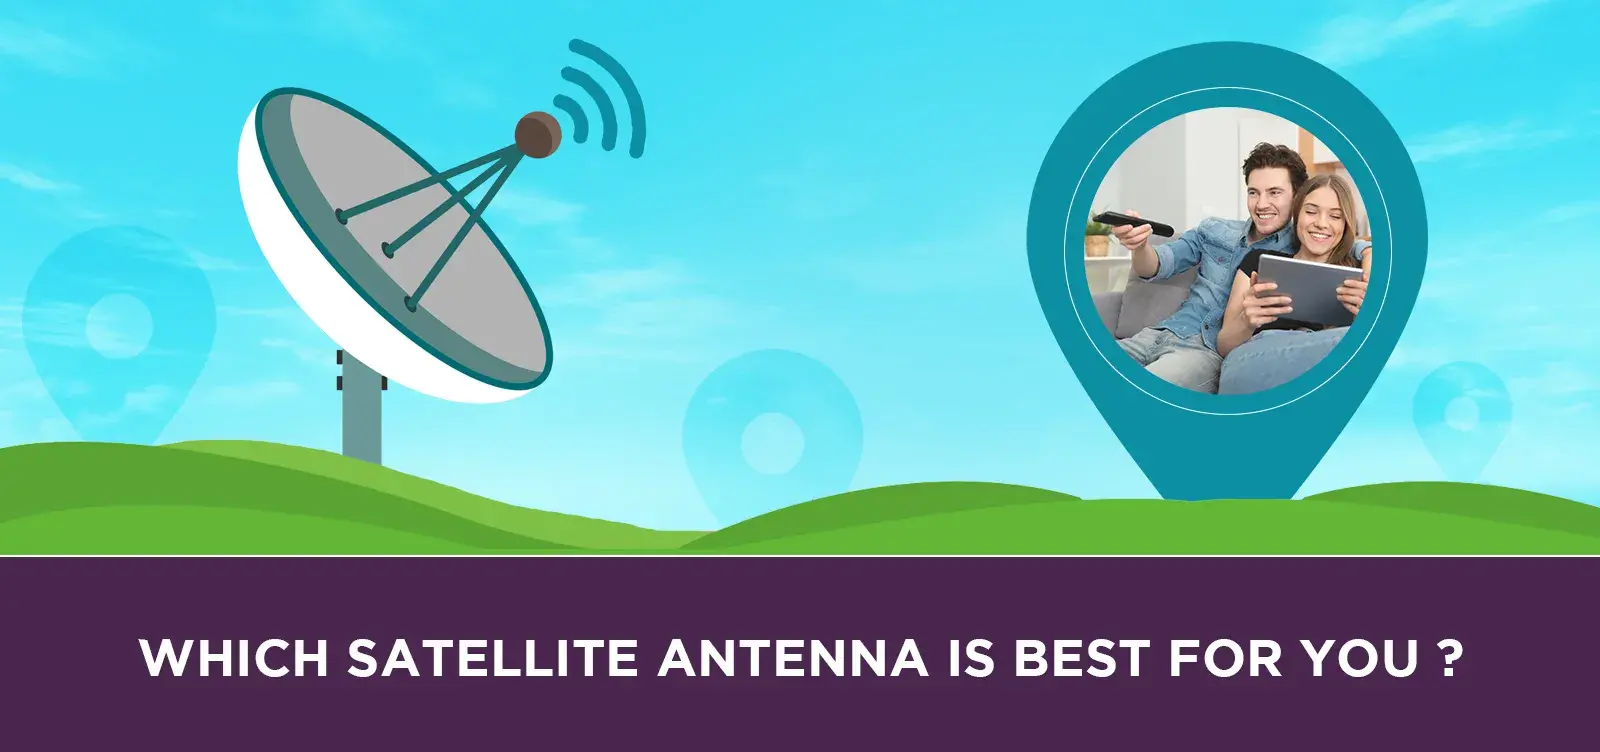 Which Satellite Antenna Is Best for You?